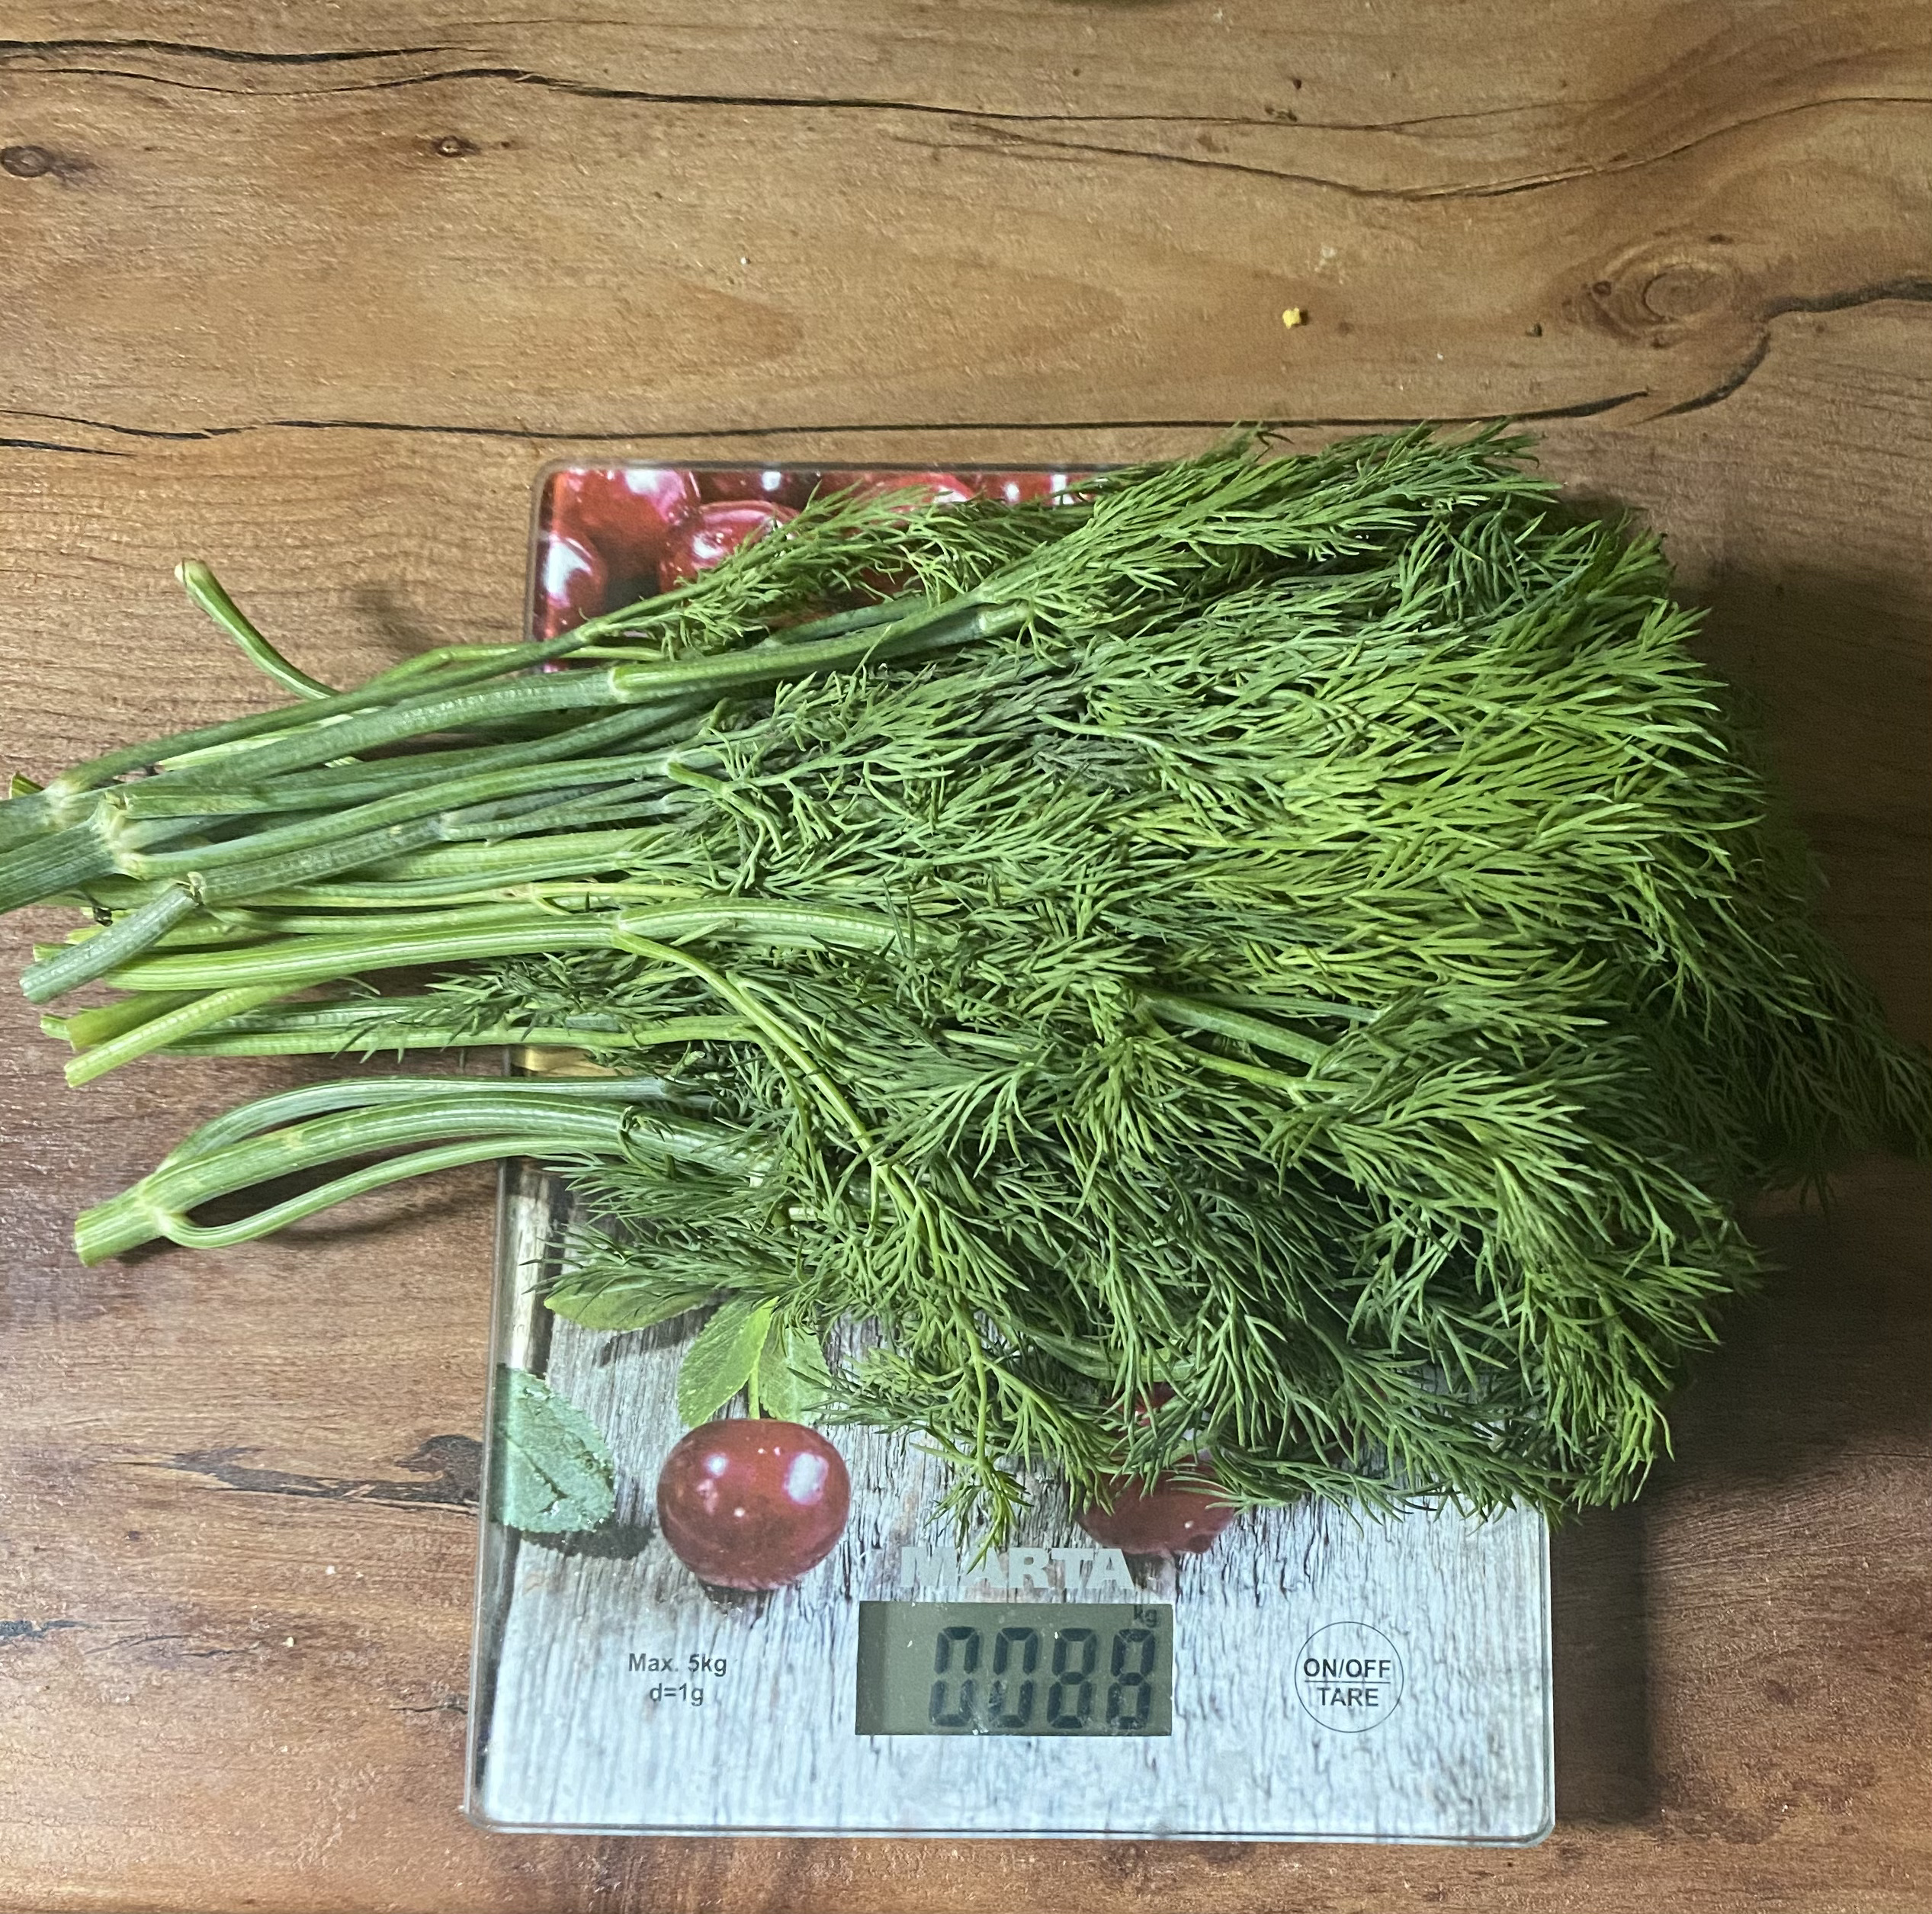 weight of a bundle of dill